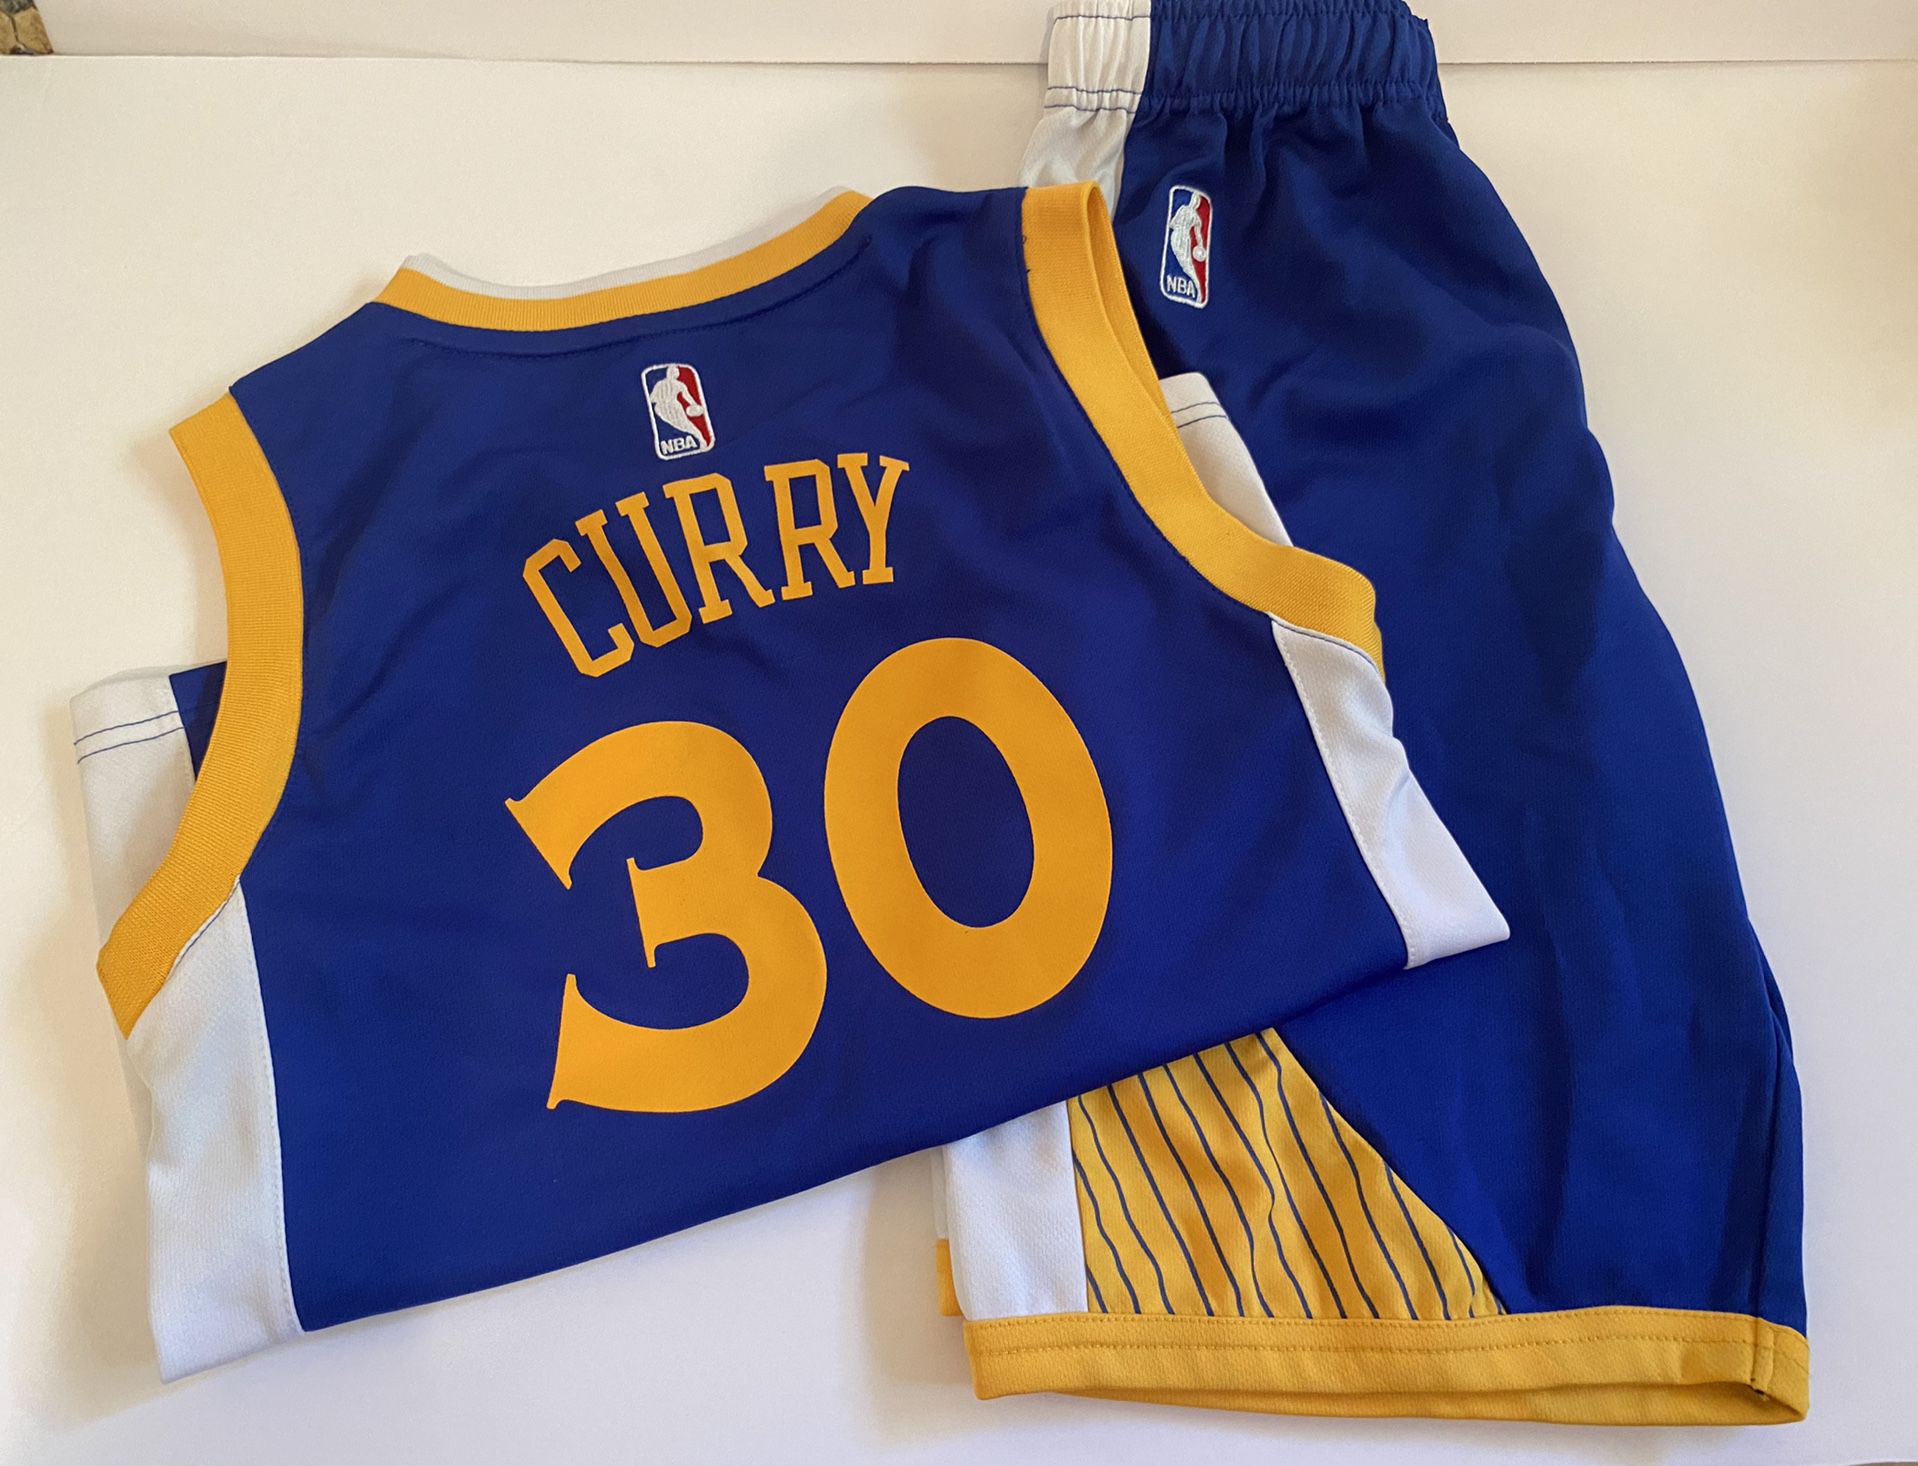 Steph Curry Mitchell And Ness Jersey Size Medium - XL for Sale in West Palm  Beach, FL - OfferUp